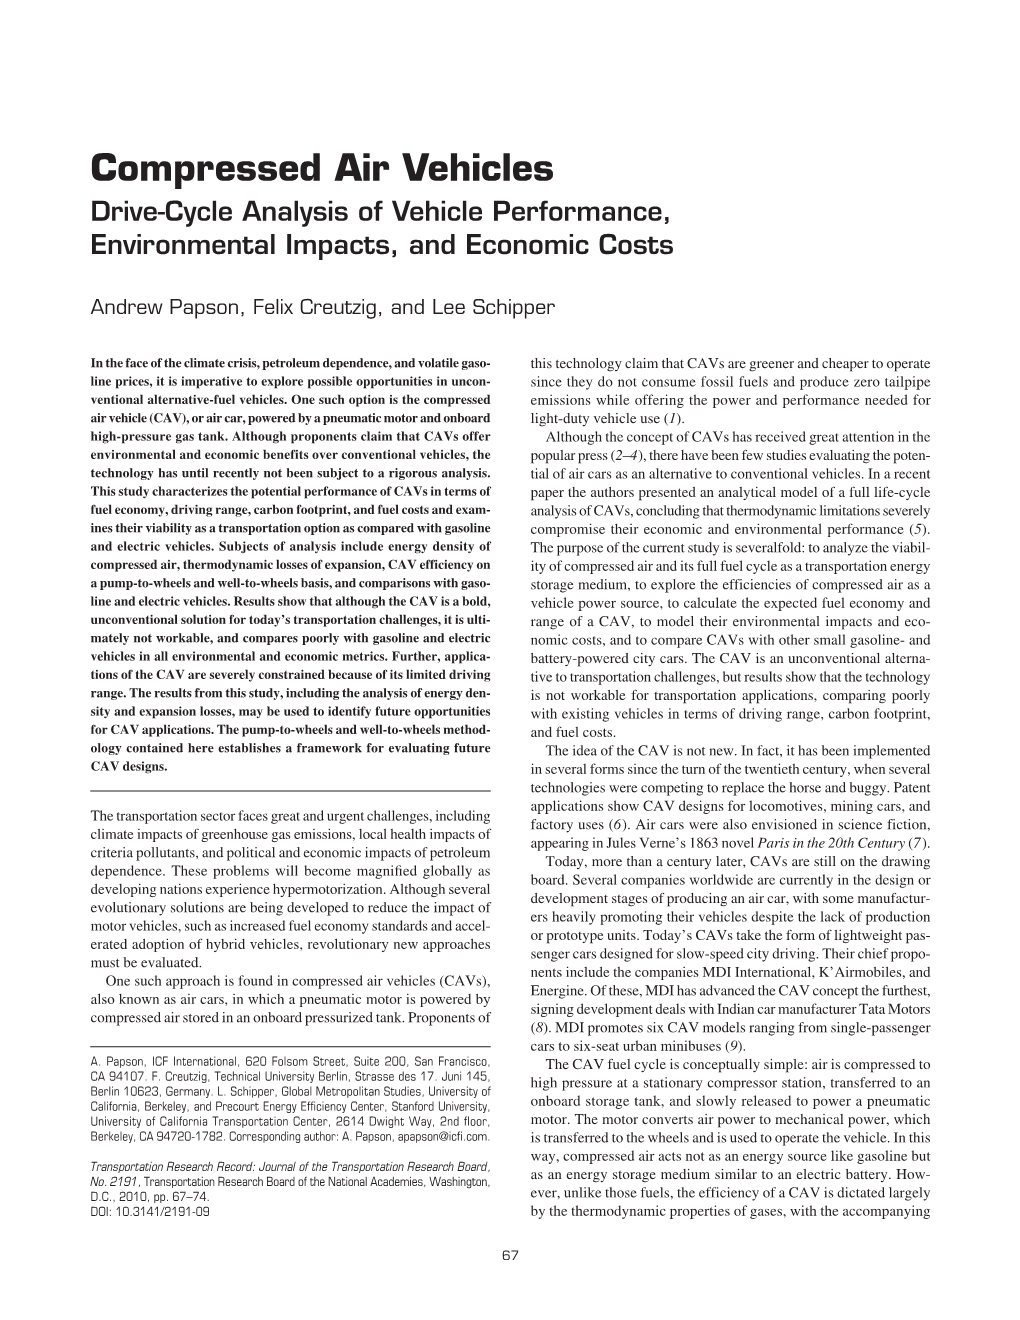 Compressed Air Vehicles Drive-Cycle Analysis of Vehicle Performance, Environmental Impacts, and Economic Costs